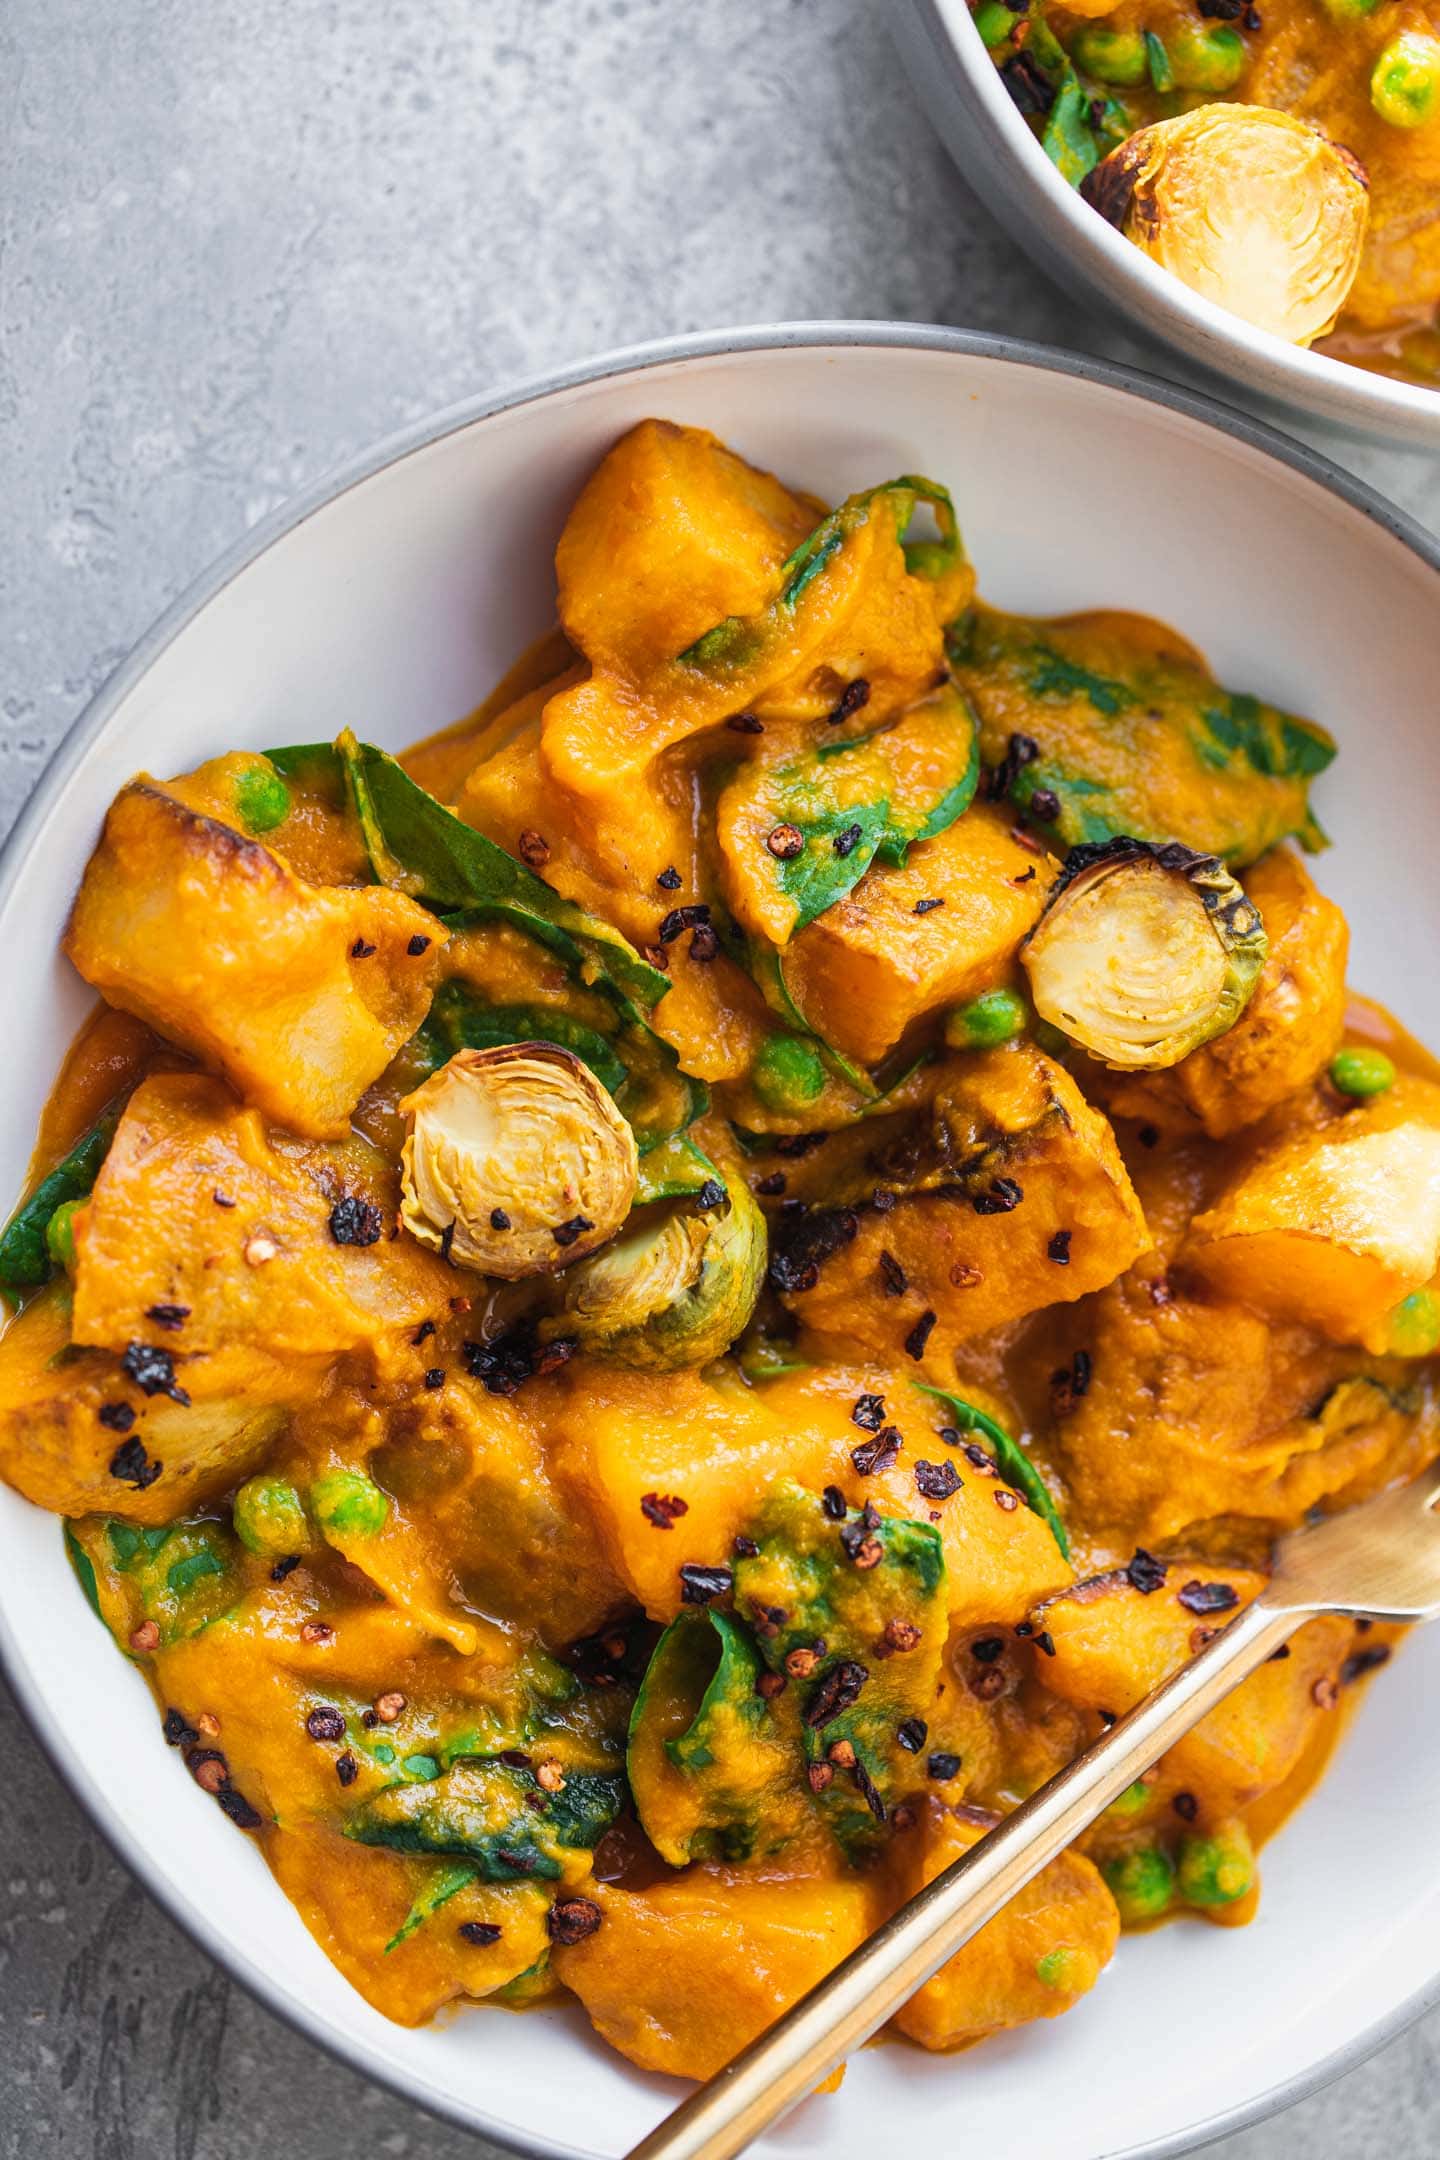 'Cheesy' roasted vegetables with a butternut squash sauce